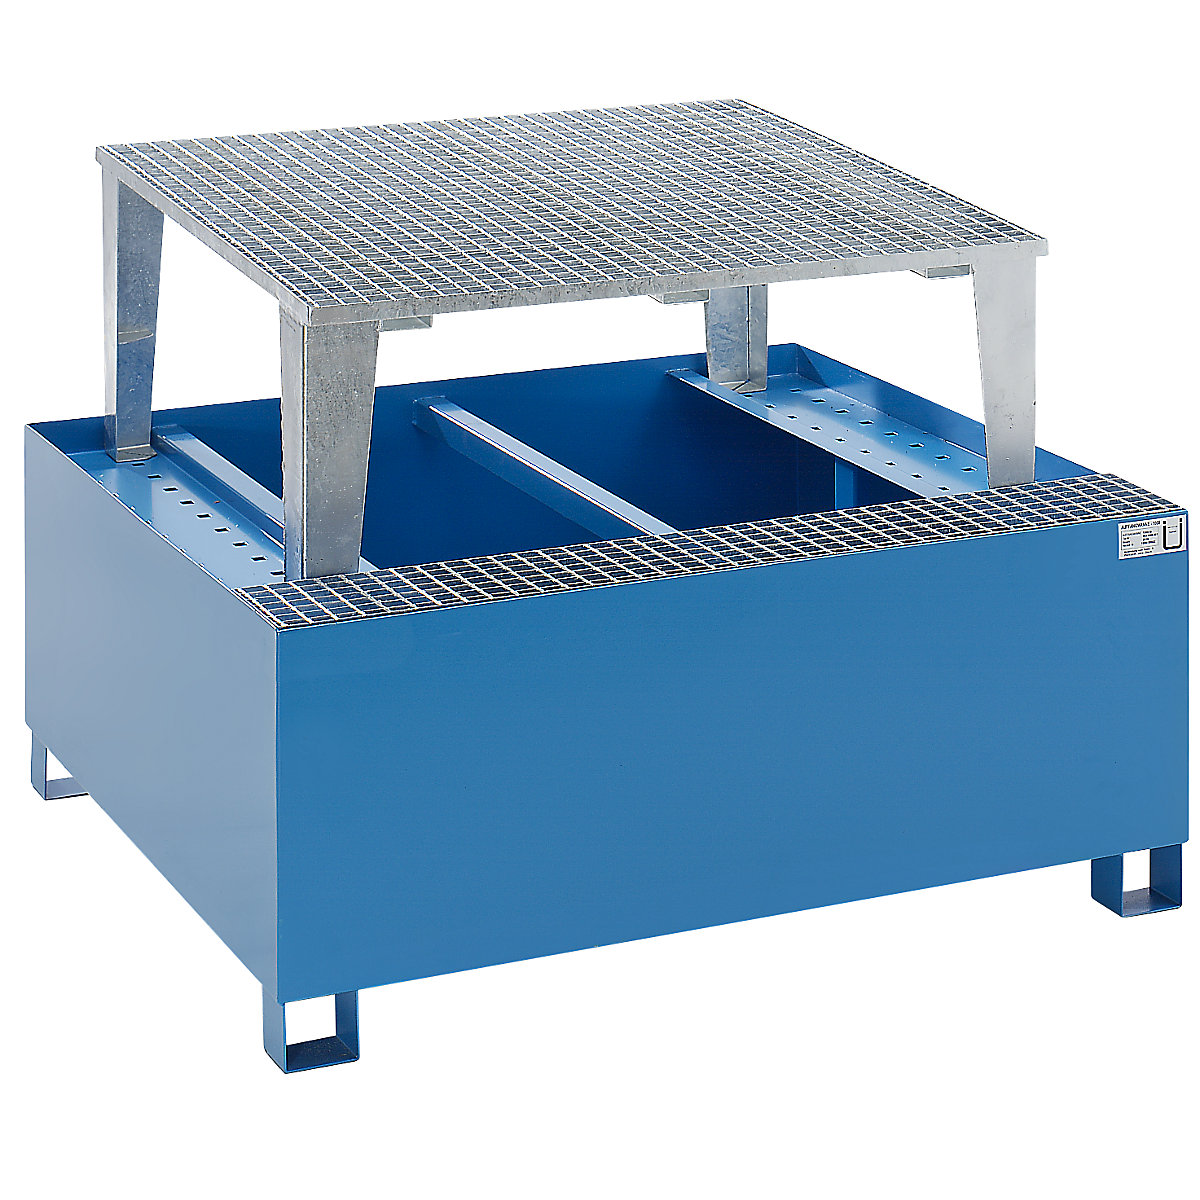 Steel sump tray for IBC/CTC tank containers - eurokraft basic